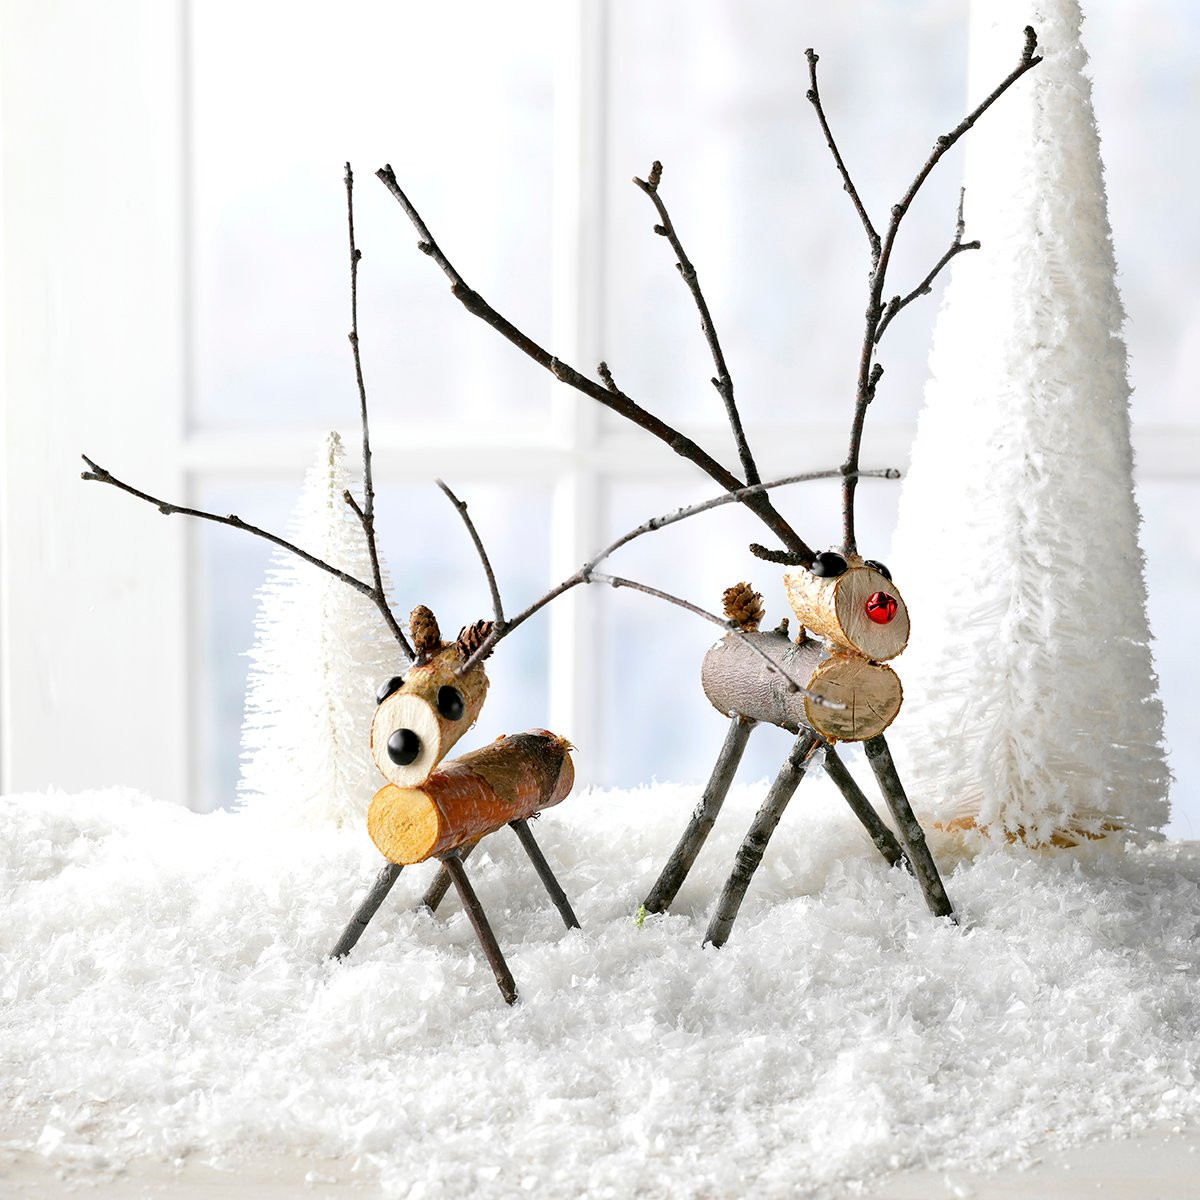 Winter Projects For Adults
 14 Cute Winter Crafts That Will Add Cheer to Your Home